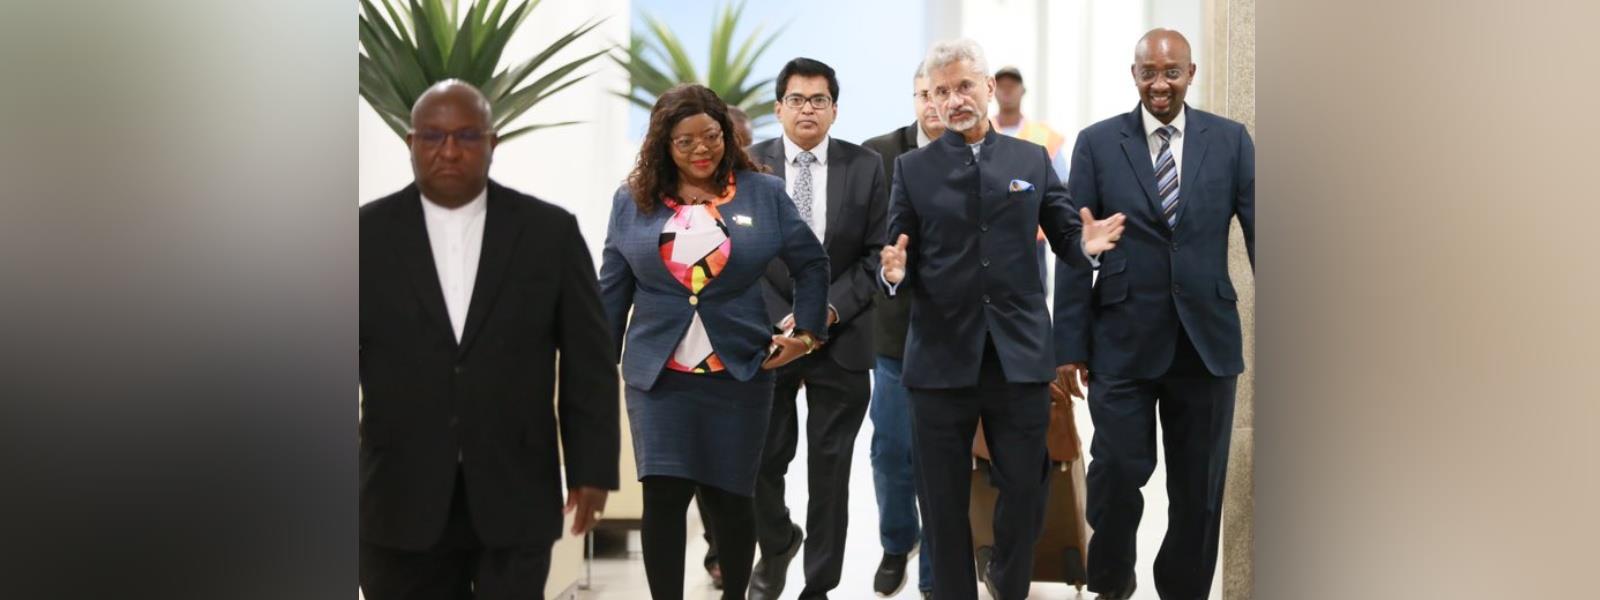 External Affairs Minister Dr. S. Jaishankar received by Deputy Minister of International Relations and Cooperation of Namibia, H.E. Ms. Jenelly Matundu upon his arrival in Windhoek